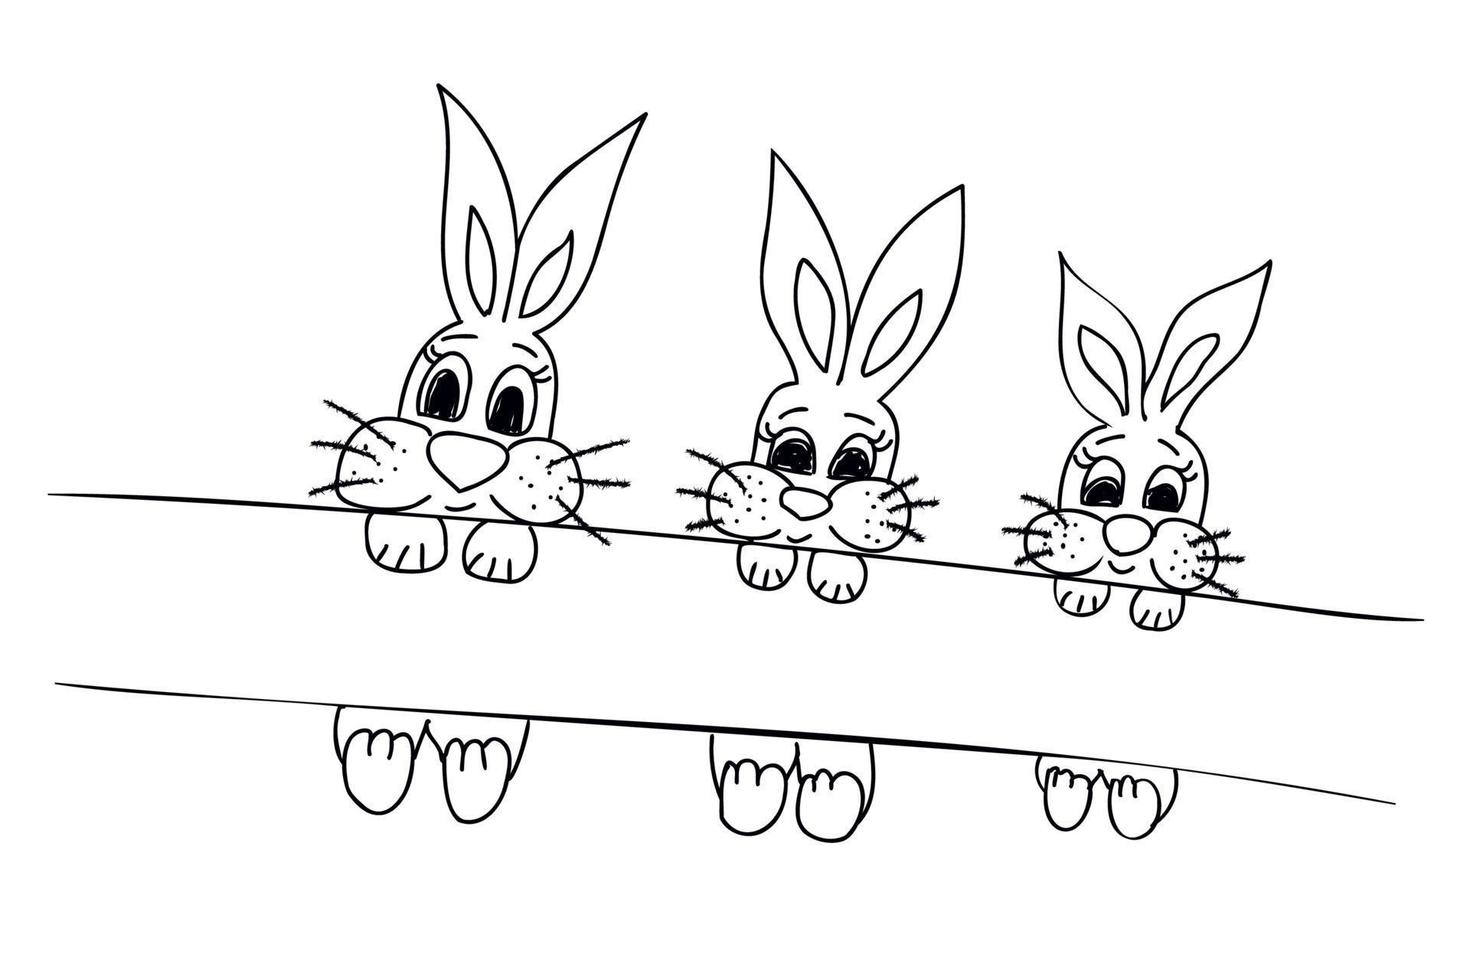 rabbits on a tree branch, painted black and white can be used for printing clothes, Christmas, postcards, etc. vector